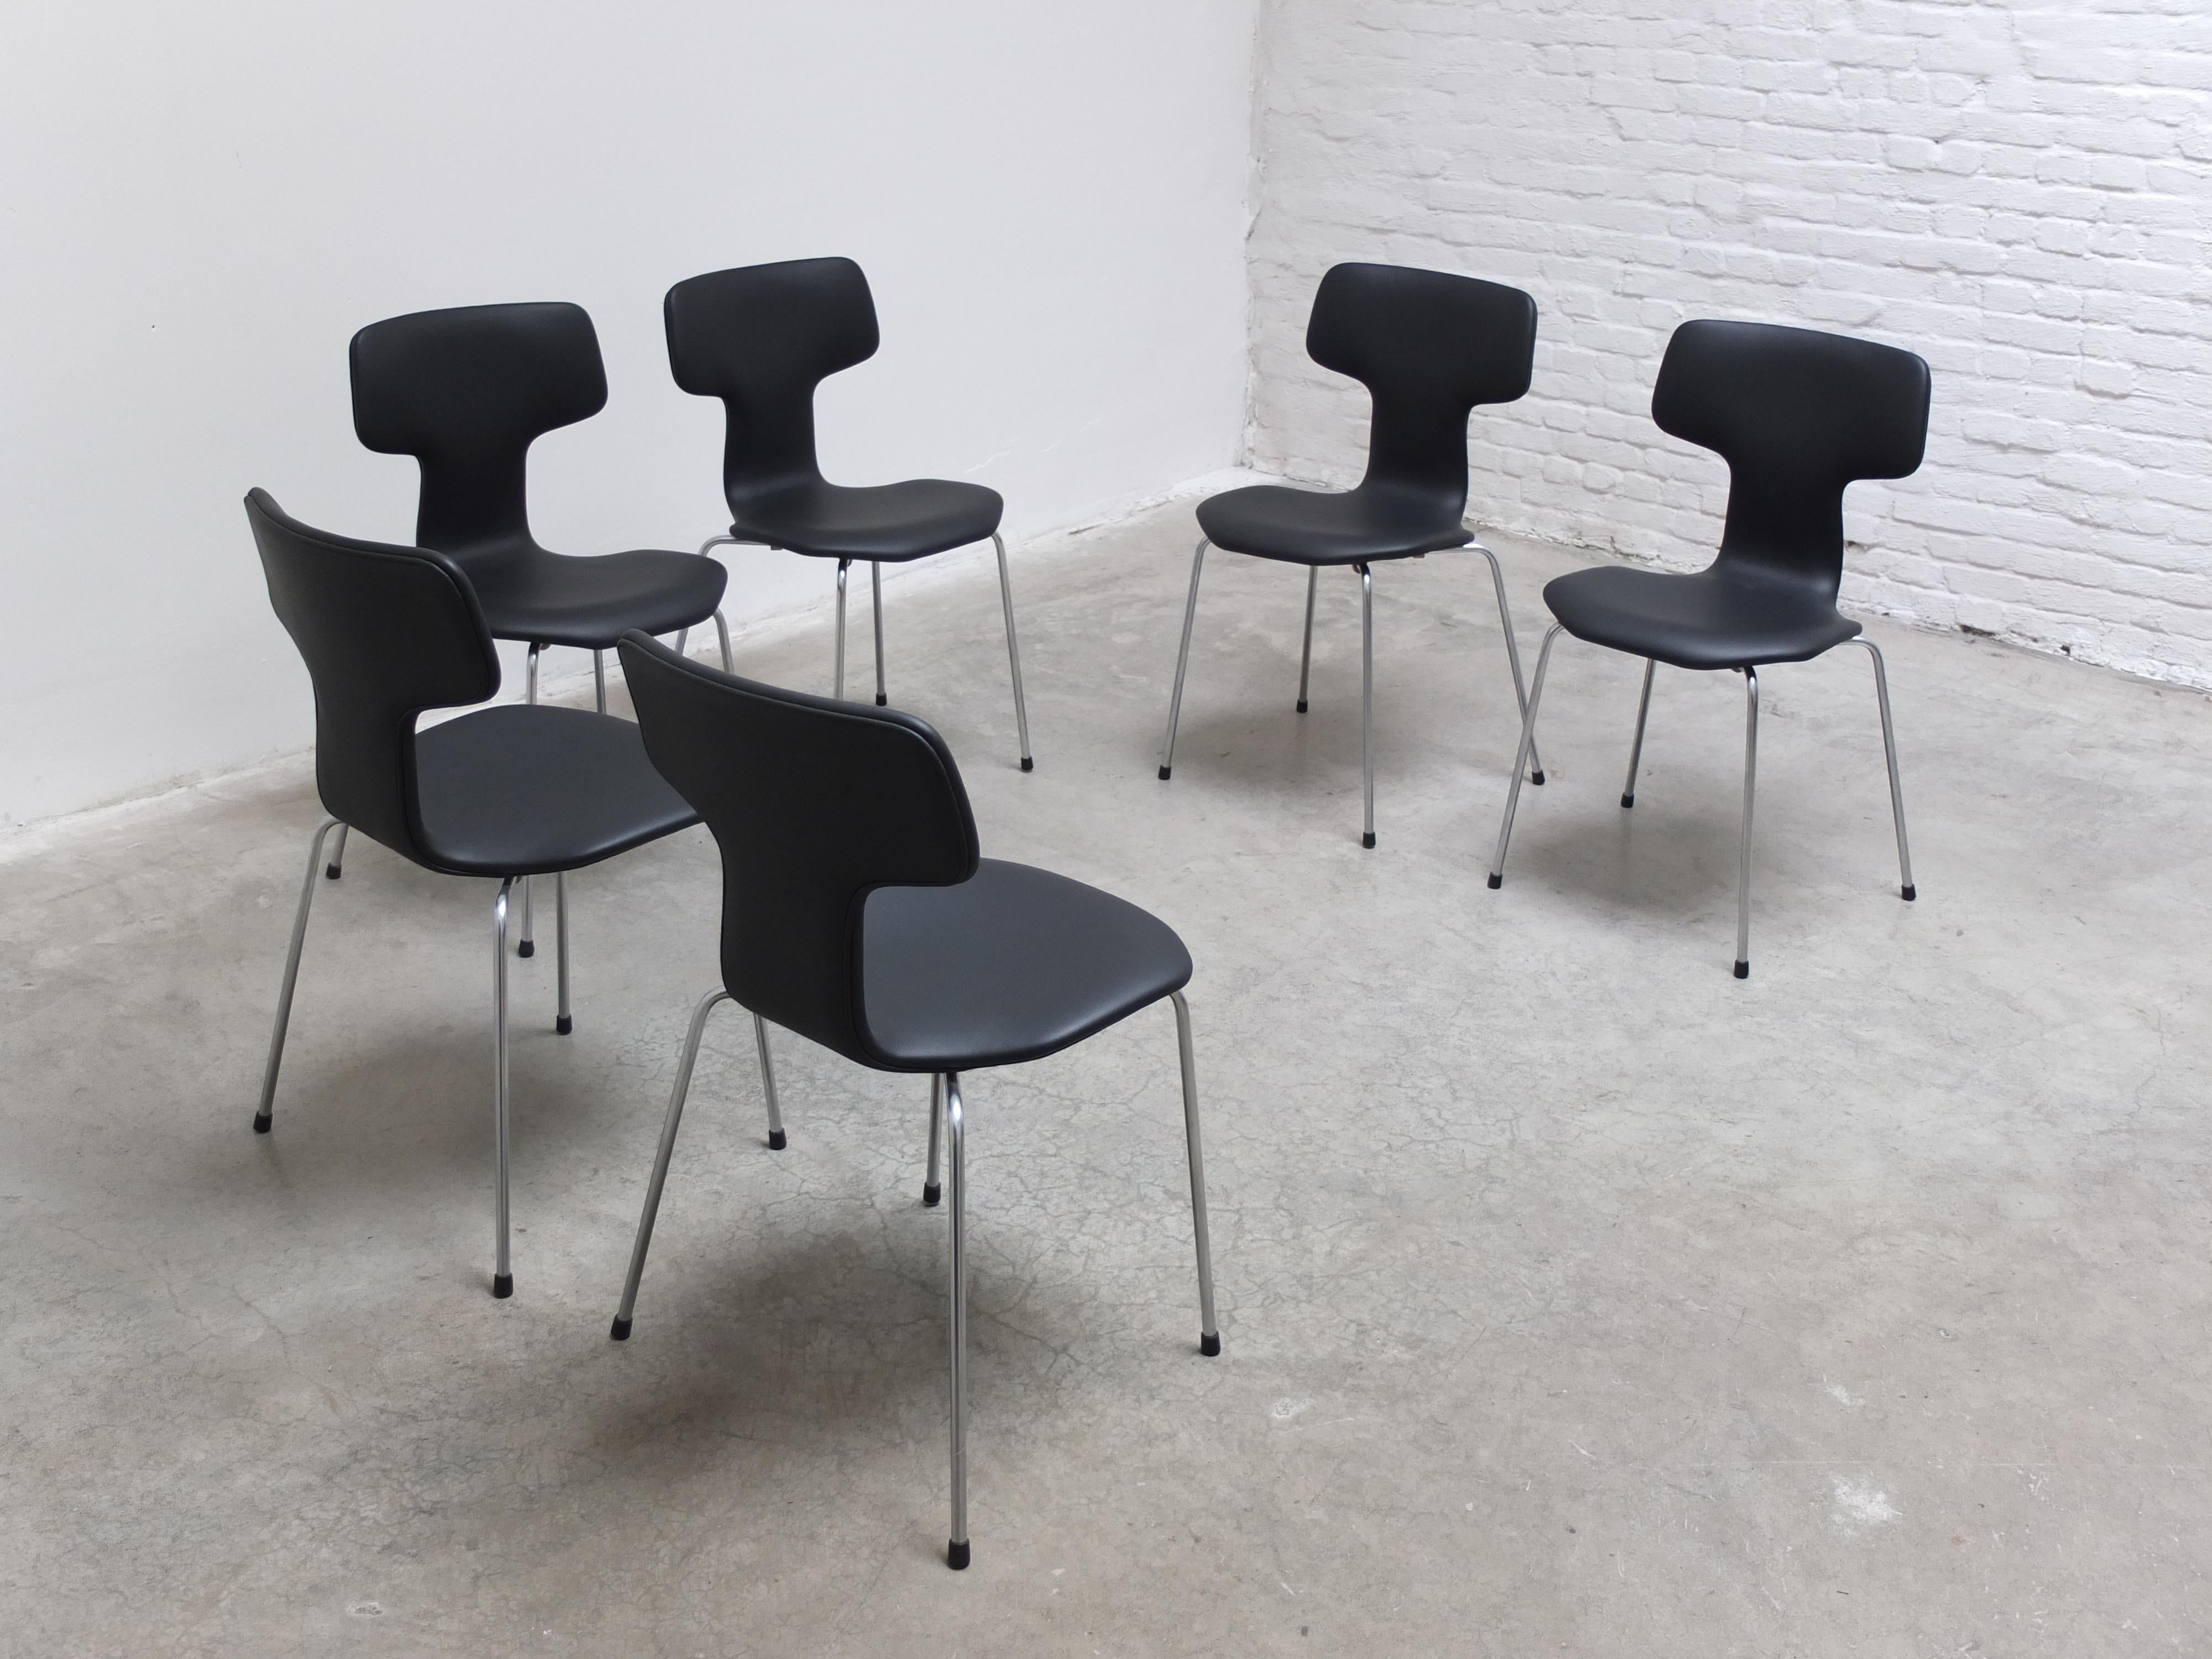 Set of 6 'Hammer' Chairs in Leather by Arne Jacobsen for Fritz Hansen, 1967 For Sale 3